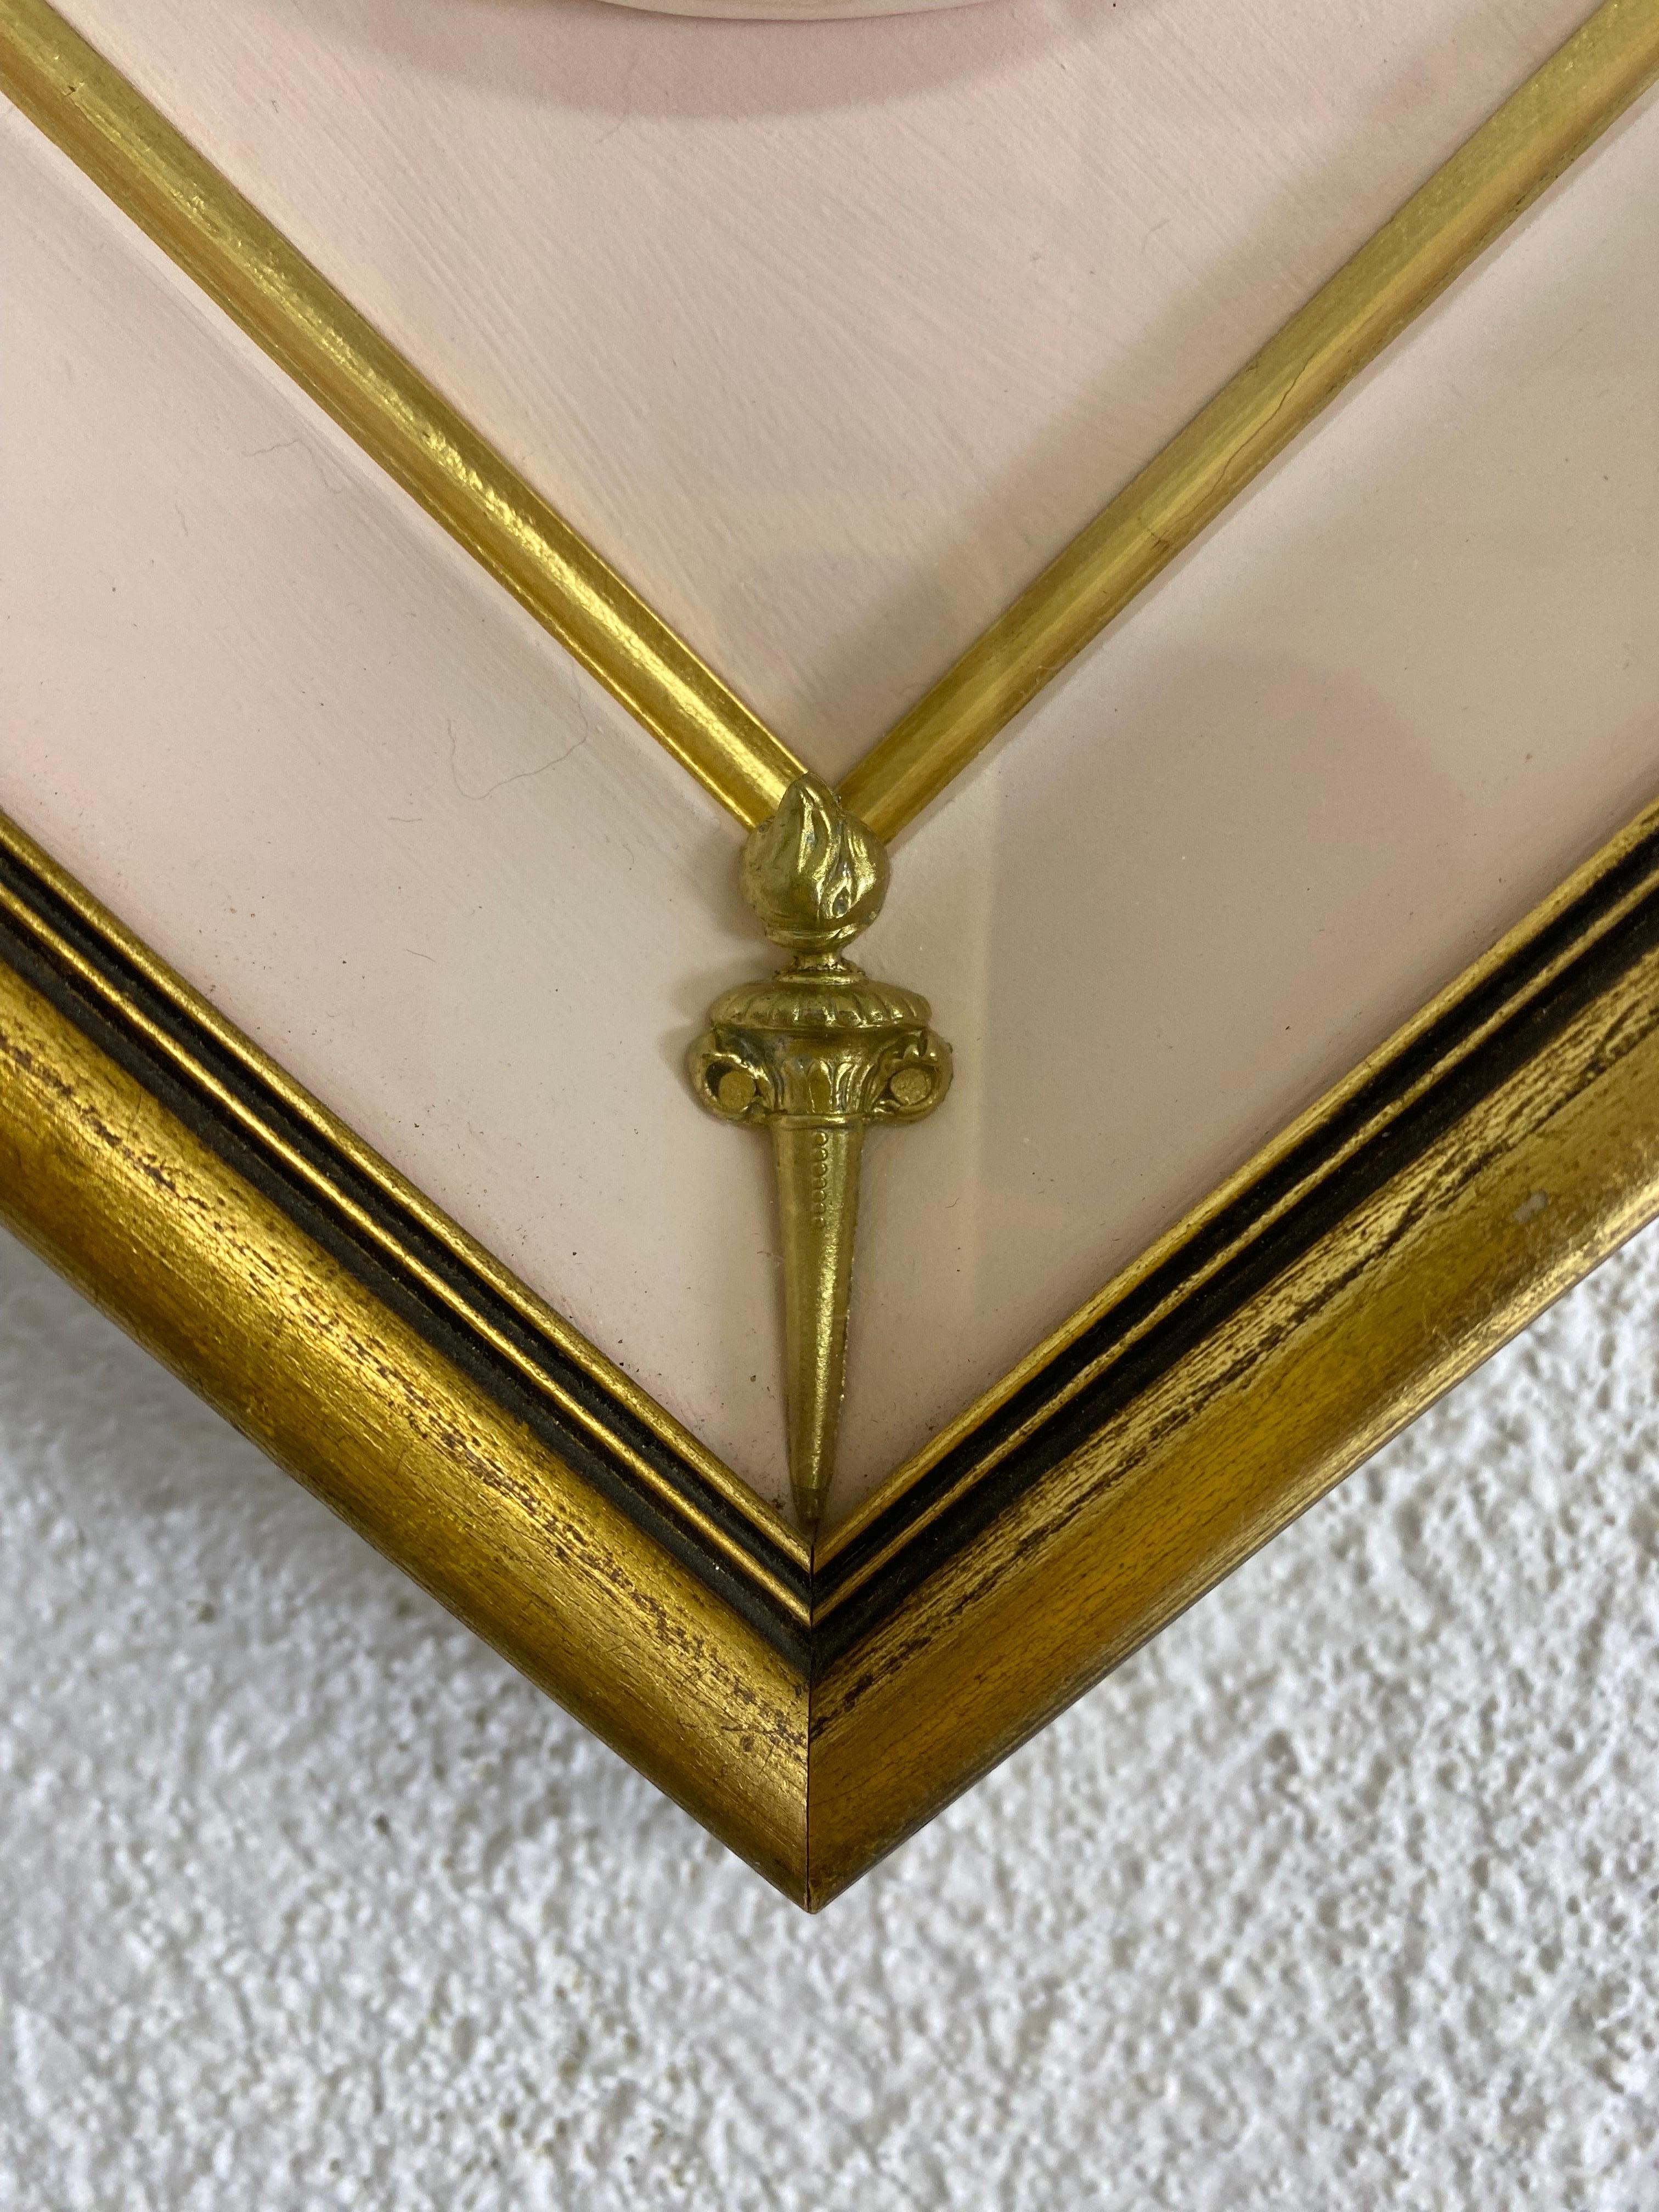 This is a mid 20th century Italian frame bisque Taglio. This Greco Roman style bisque porcelain medallion is framed in a gold leaf shadowbox frame with pink interior and gold details. This frame medallion was made in Italy circa 1950.